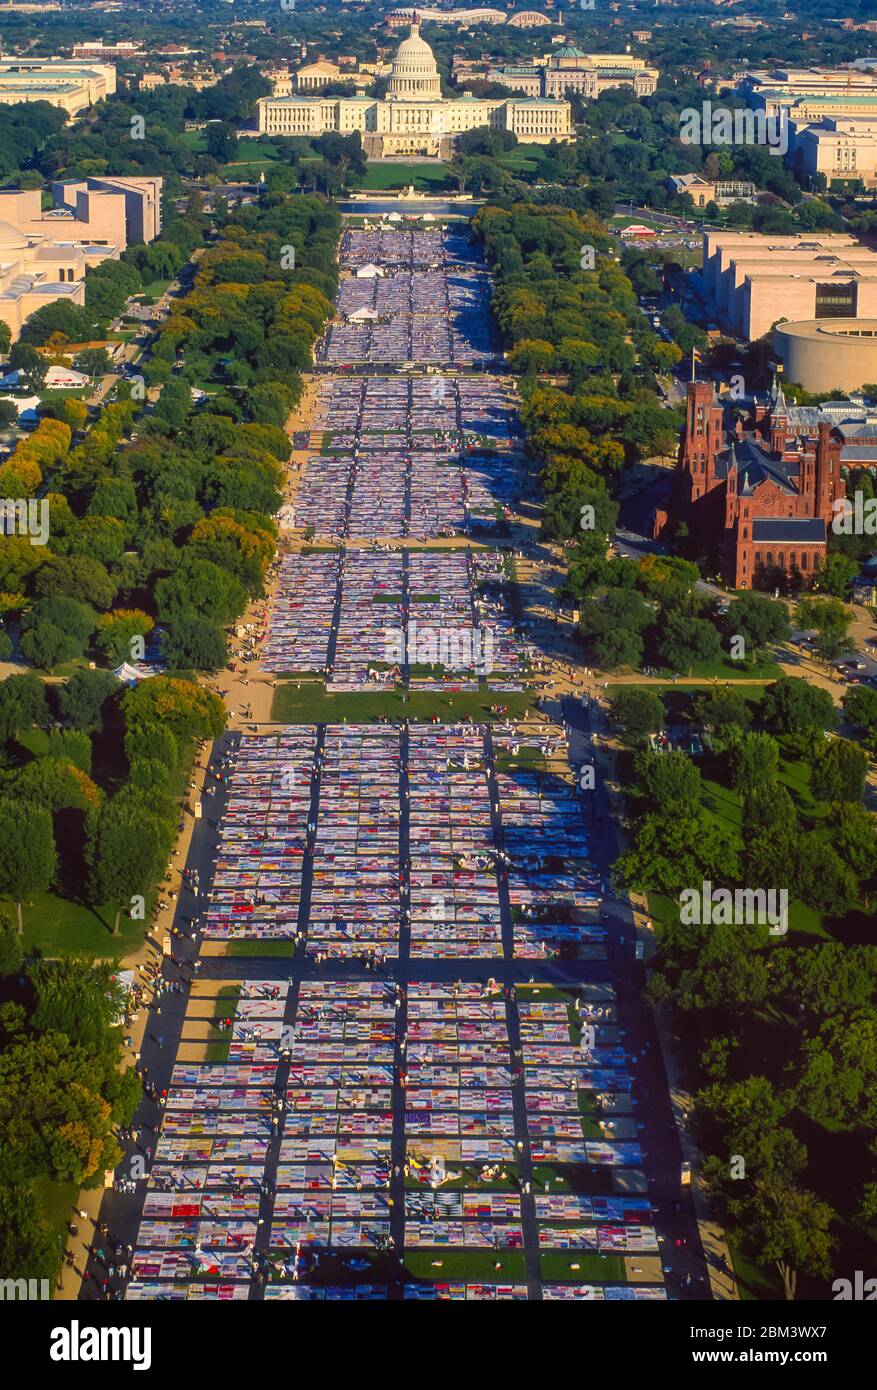 https://c8.alamy.com/comp/2BM3WX7/washington-dc-usa-october-11-1996-names-project-aids-memorial-quilt-on-national-mall-stretching-from-washington-monument-to-us-capitol-aerial-view-2BM3WX7.jpg